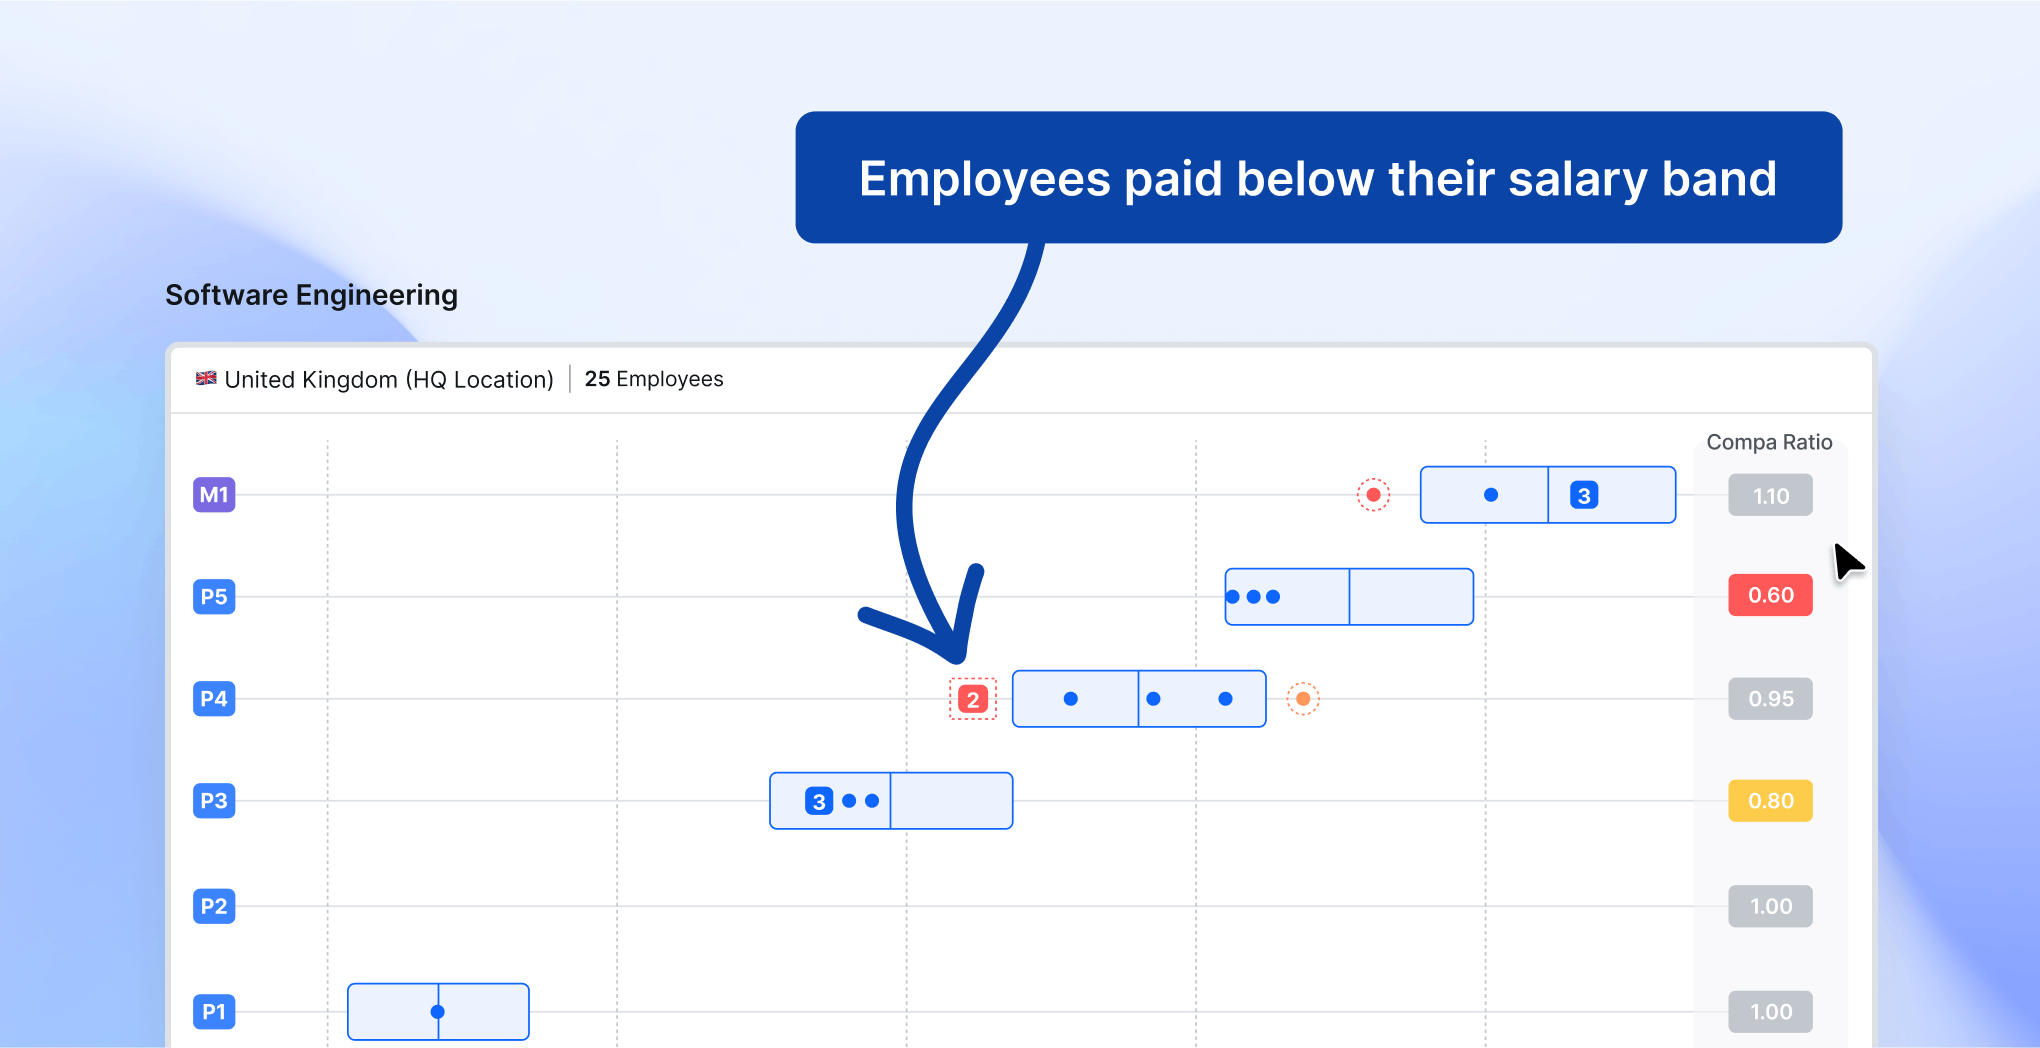 Image showing employees outside of their salary band, being paid lower than the minimum of their range.